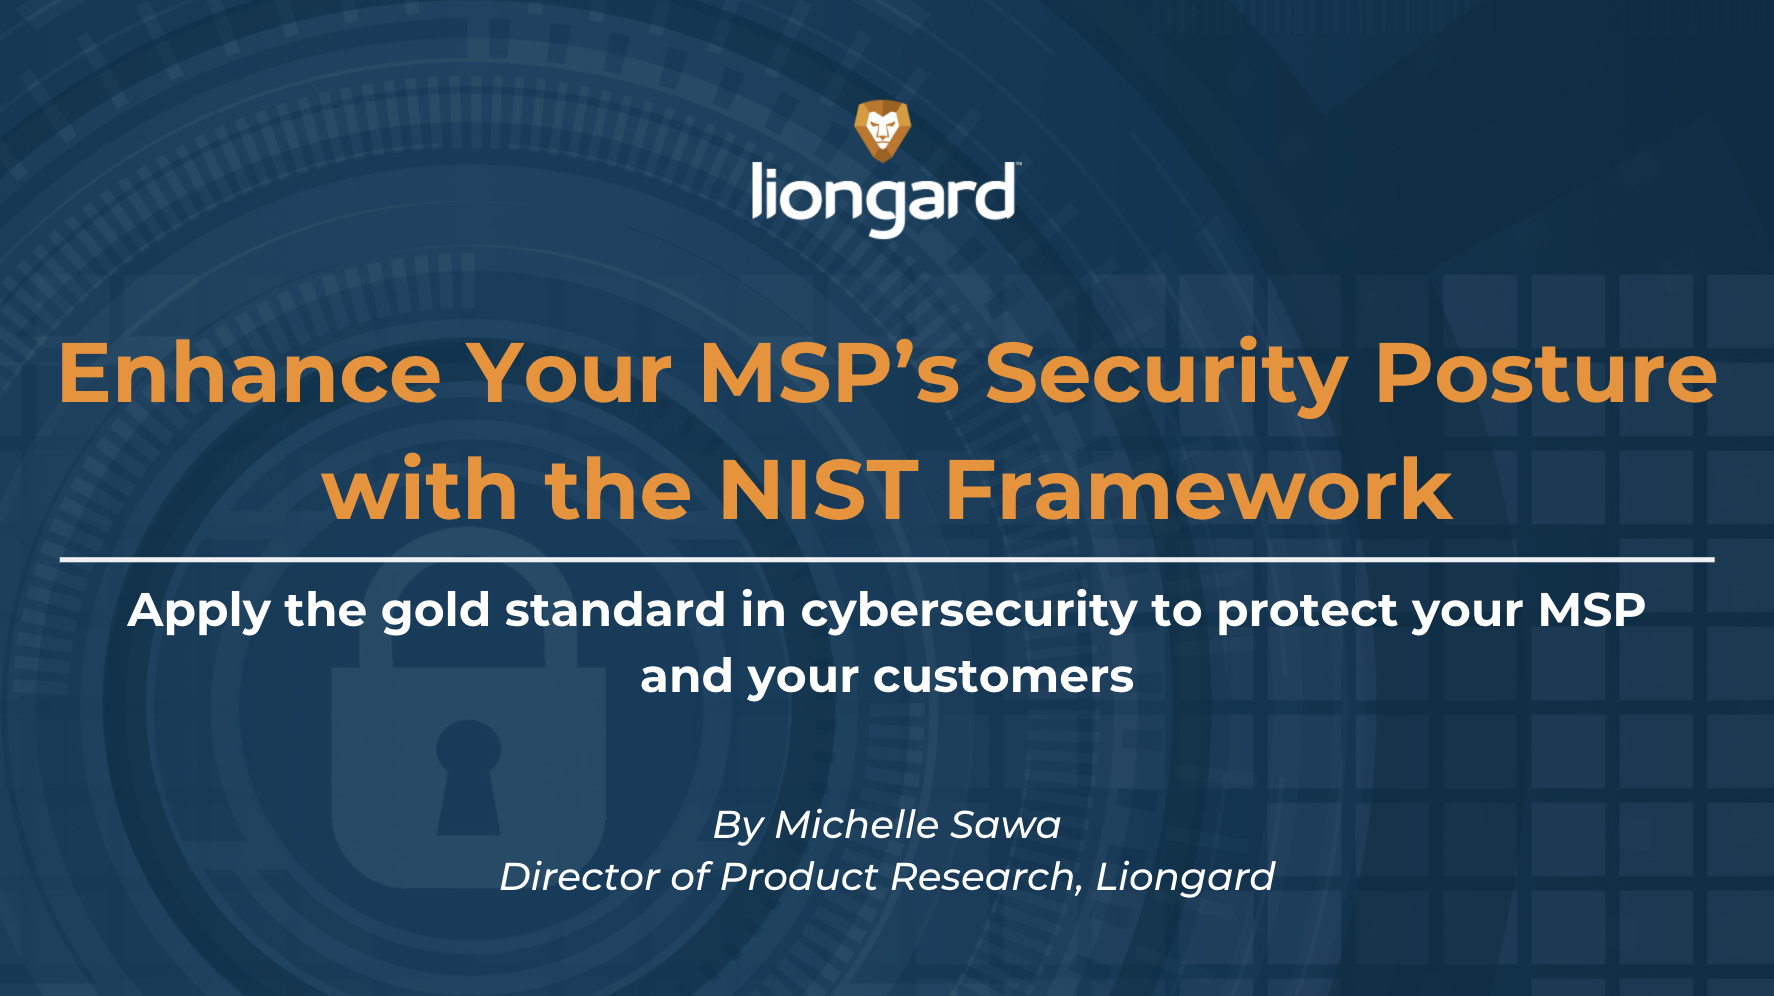 Enhance Your MSP's Security Posture with The NIST Framework